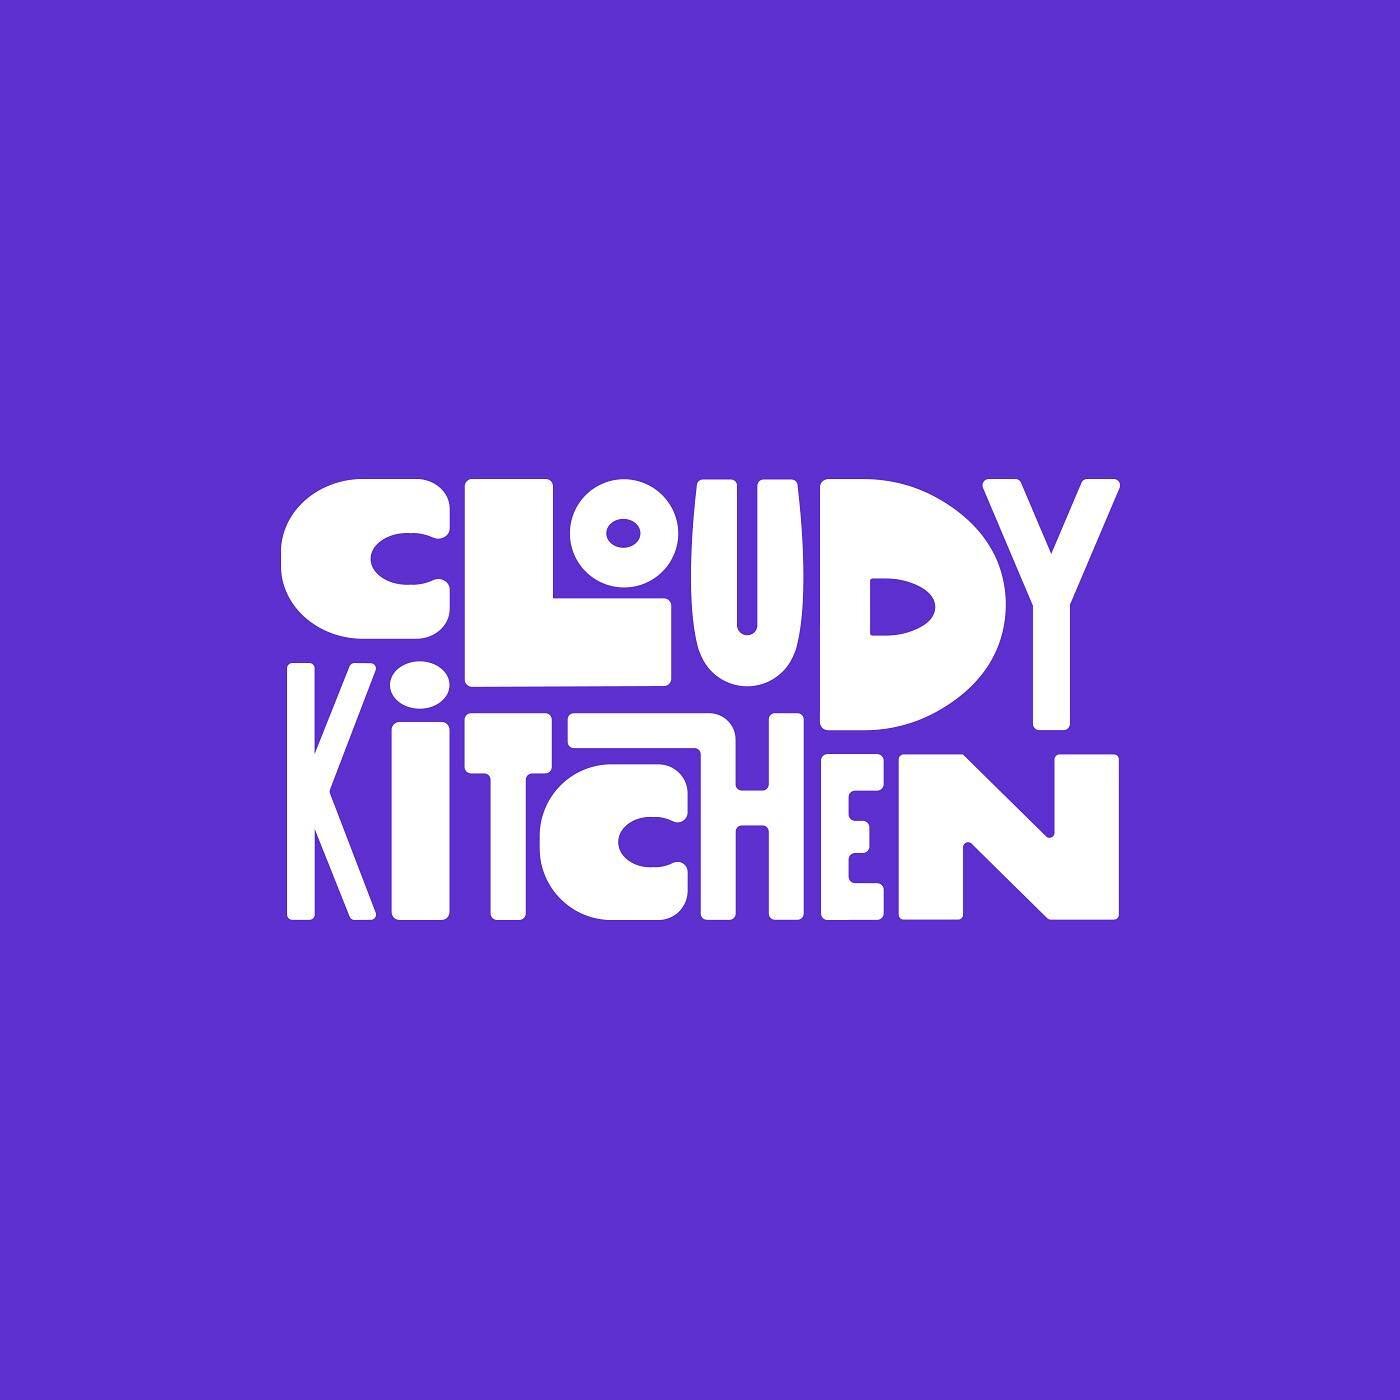 Brand identity design for The Cloudy Kitchen, a Kapitolyo based cloud kitchen that serves unique and tasty food concepts 😋🍲

The ask was to create a distinct visual identity for the business that doesn't include typical cloud kitchen branding eleme